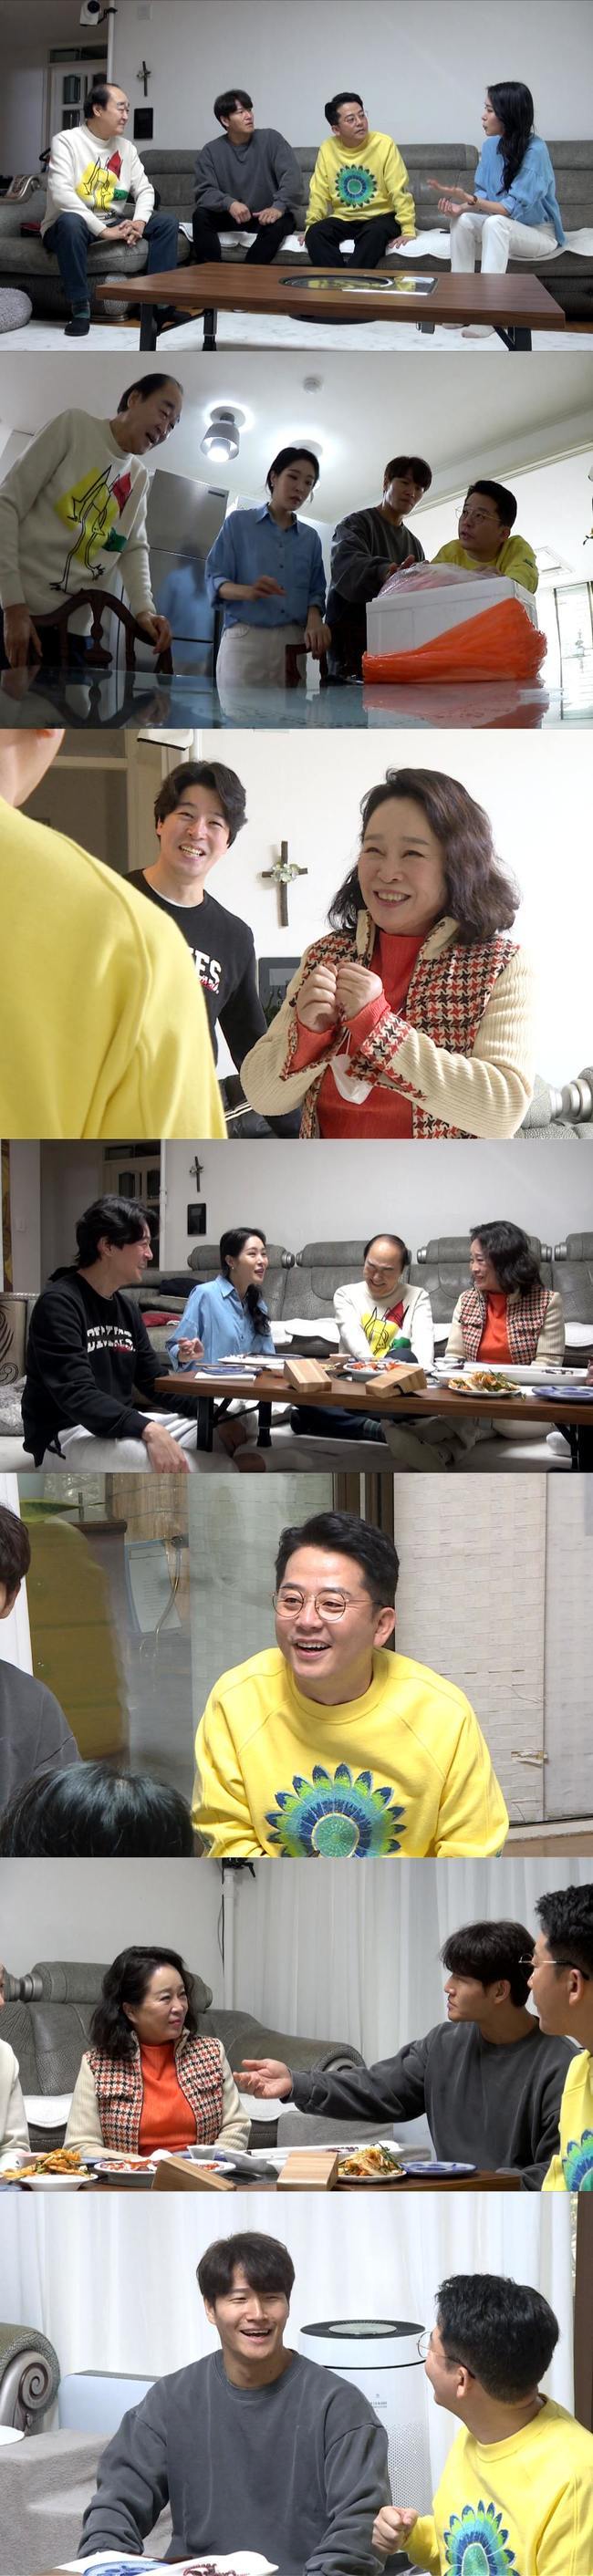 Actor Jang Gwang became a cold rice to his wife because of singer Kim Jong-kook.Kim Jun-ho and Kim Jong-kook visited the Jang Gwang family home in the recent SBS My Little Old Boy recording.They are to help Jang Gwang, who prepared a surprise event for his wife, who invited his wifes favorite entertainer Kim Jong-kook as well as challenging her usual dishes to focus her attention.Thanks to Cooking Poop Hand Jang Gwang and My Little Old Boy, the recording site was devastated by the combination of Miza, Junho and Jongguk, which became a hot topic.The great octopus cooks of enormous size were sweating because of the octopus that continued to escape, and Jang Gwang, who finished the dish at the end of the twists and turns, was excited to surprise his wife.But the interest of his wife, Jang Gwang, who returned home, was all over Kim Jong-kook; the dish that Jang Gwang did was pushed to the back, and the end was welcomed (?) One wife said, I lived without divorce, and this is a good day. She poured storm reaction toward the end and made the studio into a laughing sea.In addition, he objected to Why is my Little Old Boy? His son boasted his uncompromising gesture, saying Steam My Little Old Boy.So, My Little Old Boy Junho sided with his son, but it is the back door that he was laughing because he could not speak when the gift of the mothers day given by his son was released.My Little Old Boy, The Jang Gwang Familys Meet will air March 20 at 9:05 p.m.